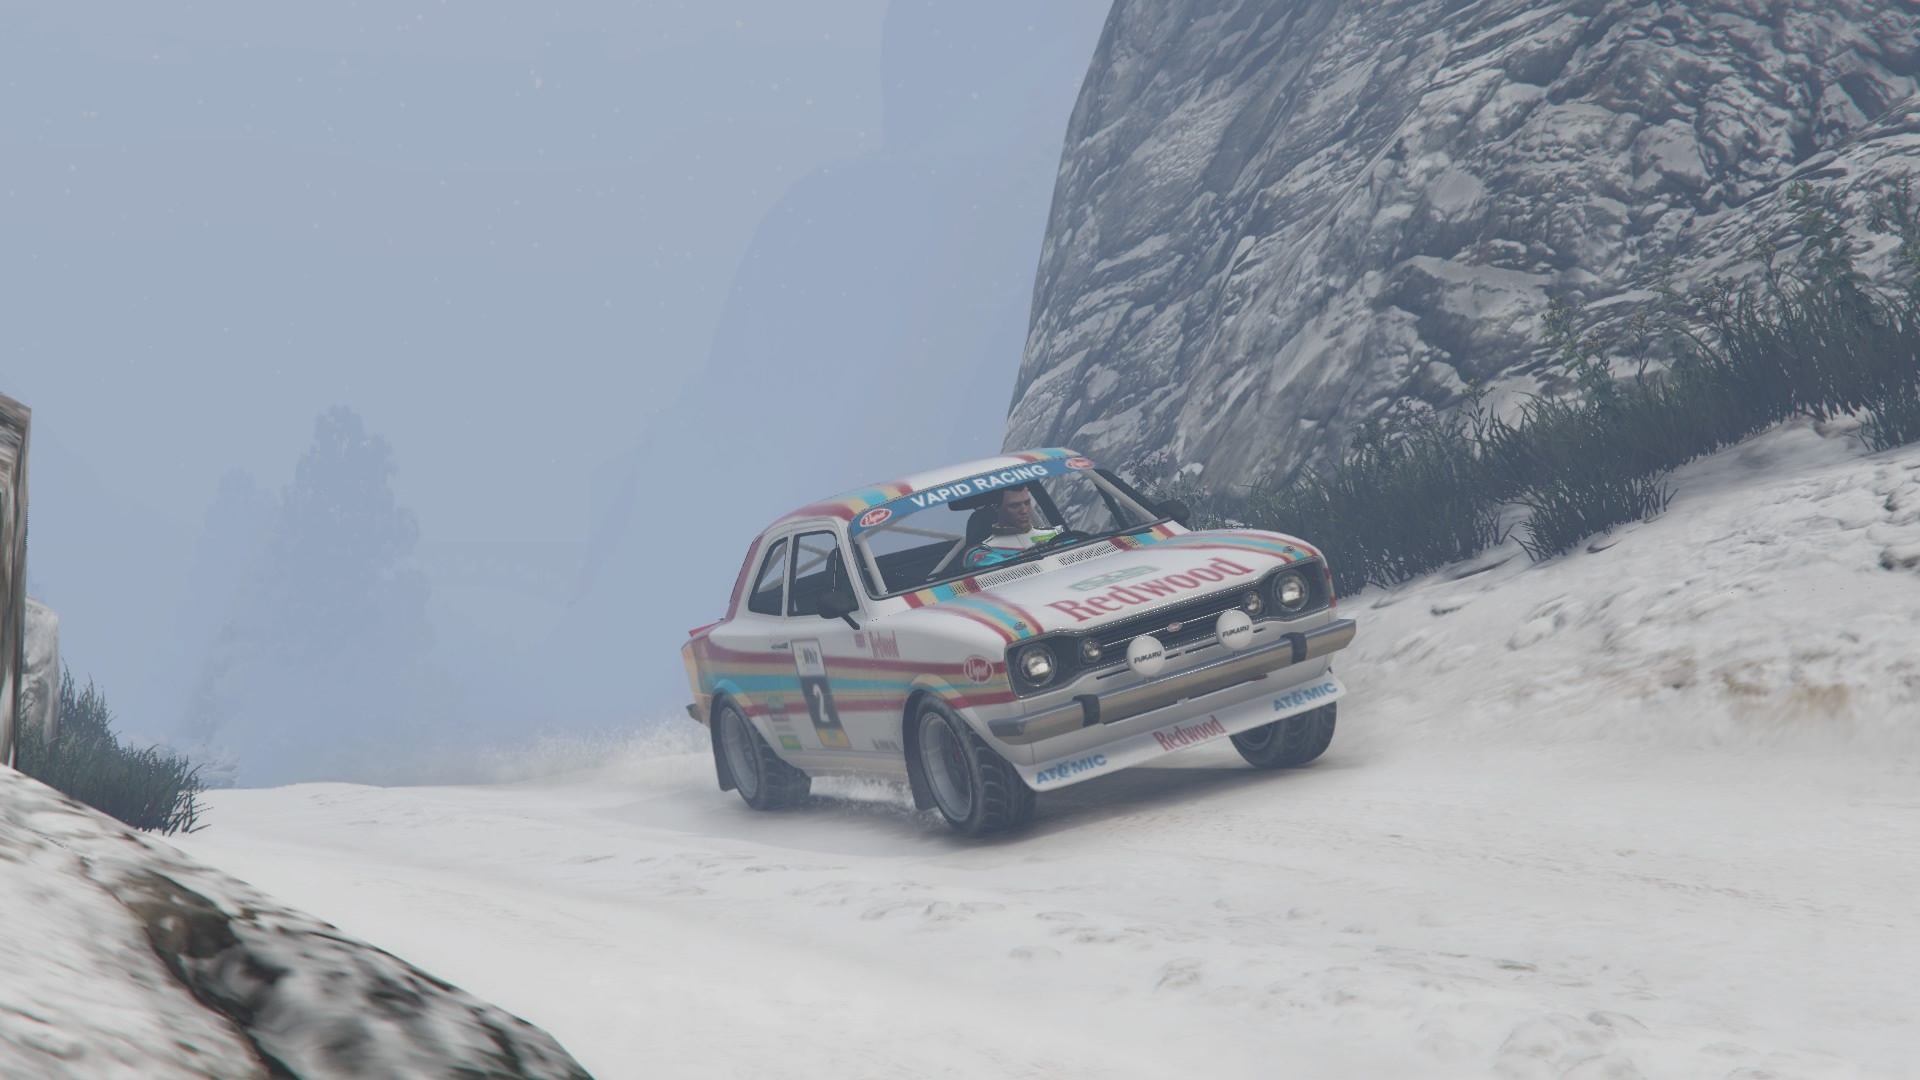 Grand Theft Auto V - Rallying In The Snow - 17